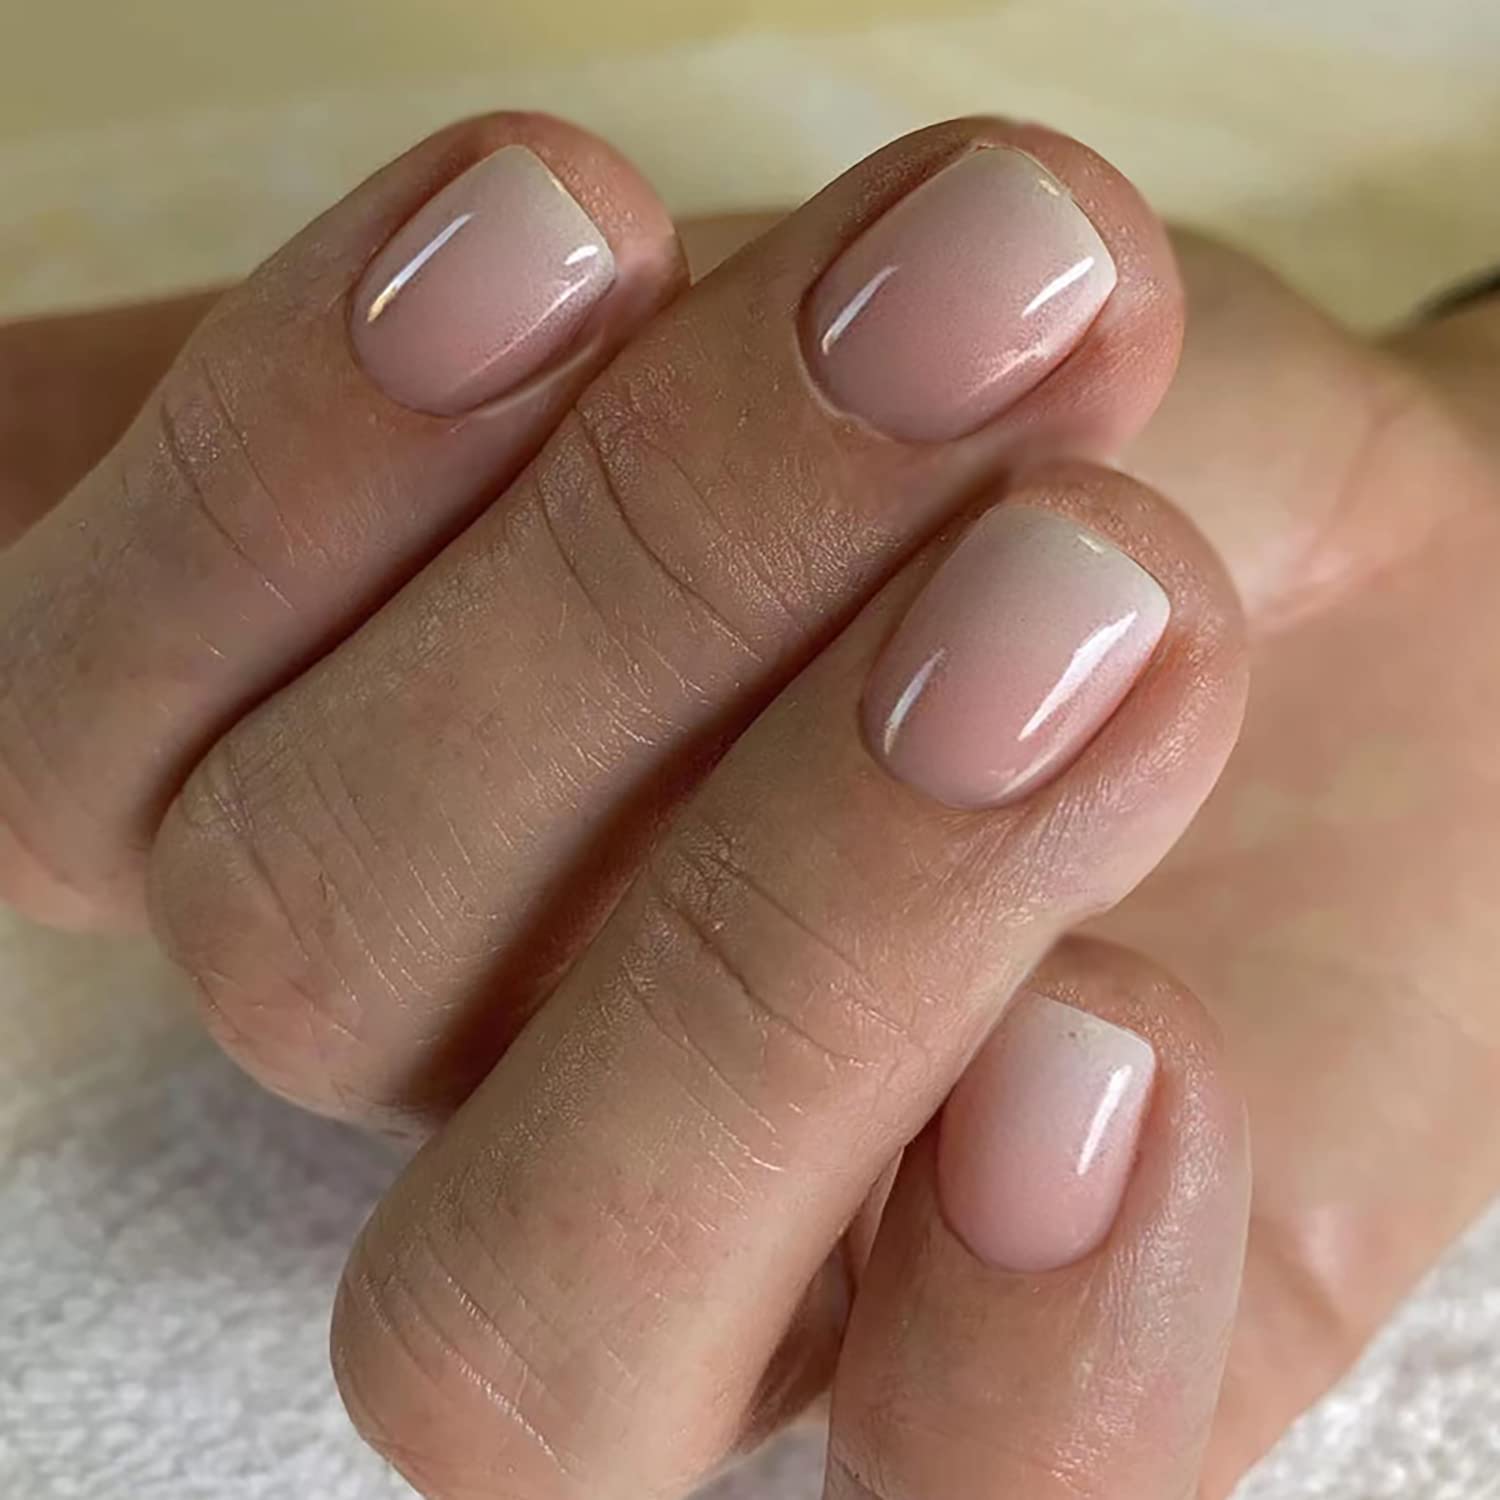 7 Short Acrylic Nail Ideas To Try If You Hate Having Long Nails